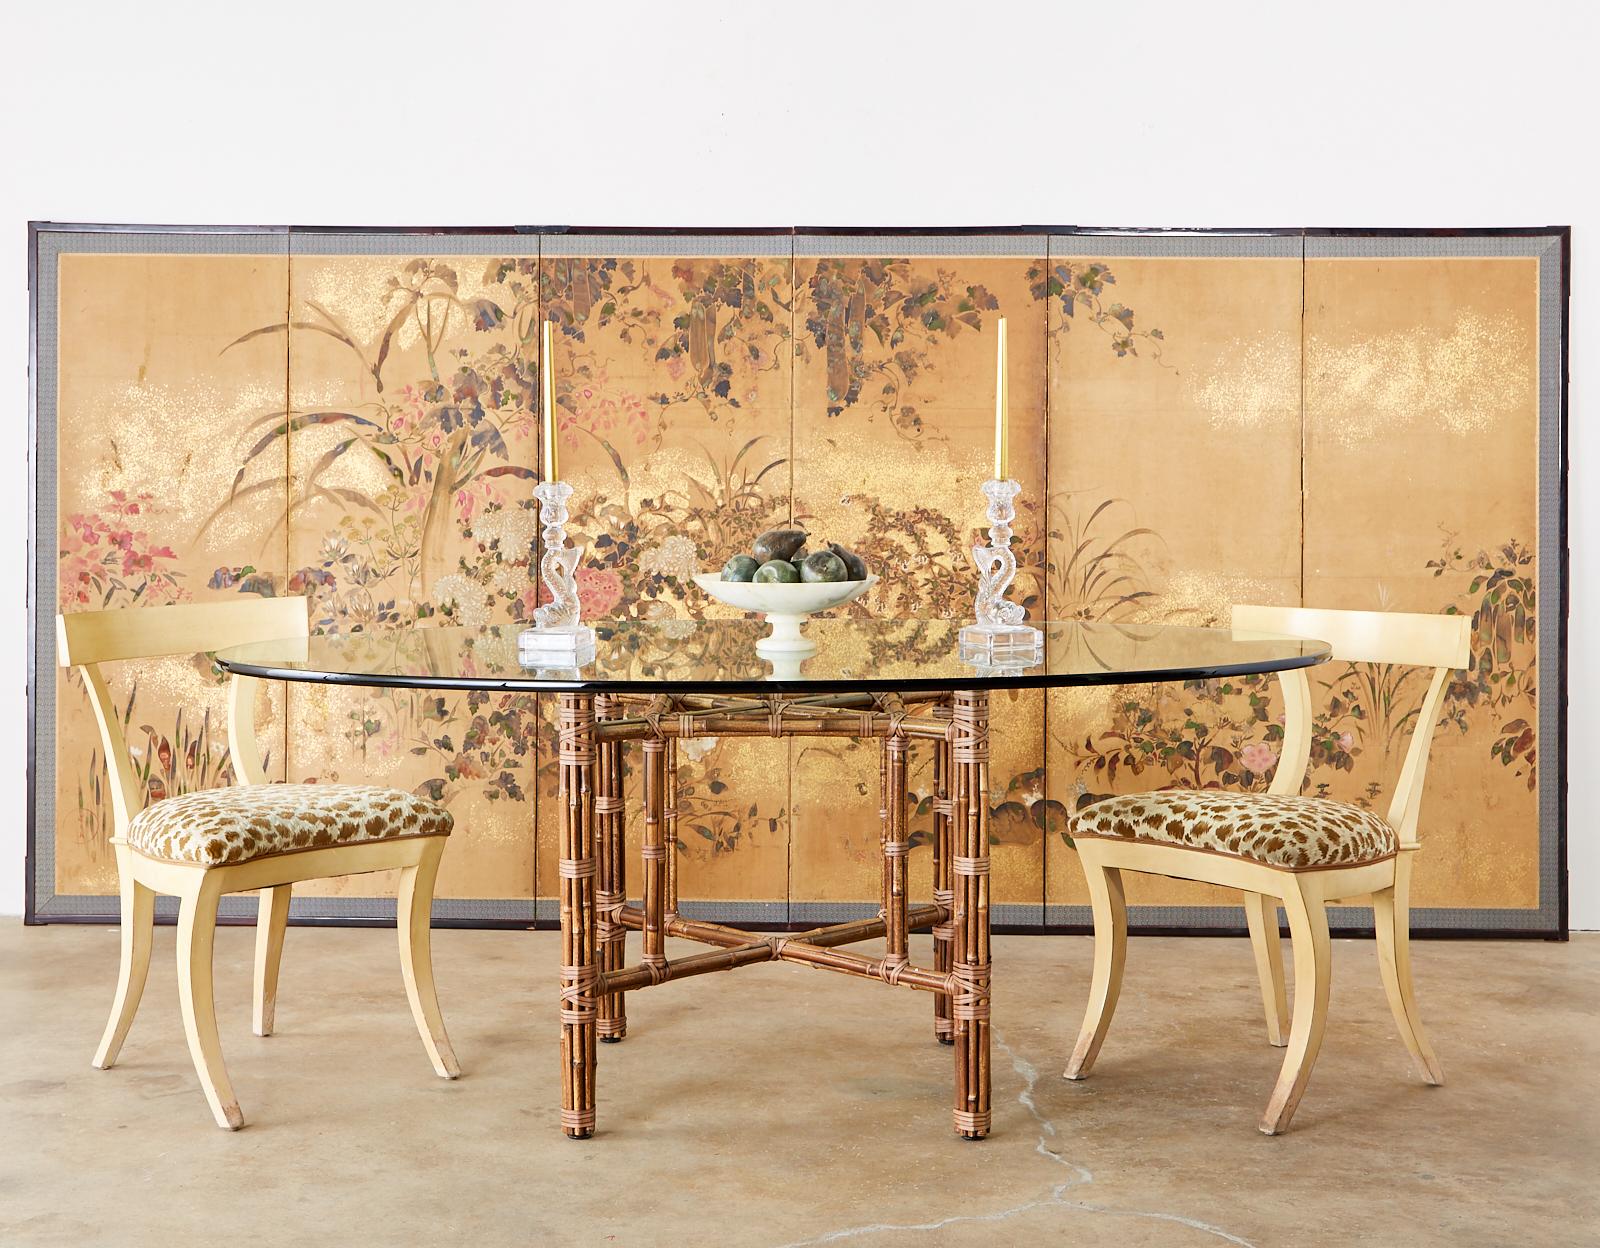 Genuine McGuire California organic modern style oval dining table constructed from an authentic Golden Gate Bridge orange painted iron frame covered with bamboo rattan poles. The rattan is lashed together with leather rawhide laces and each leg has